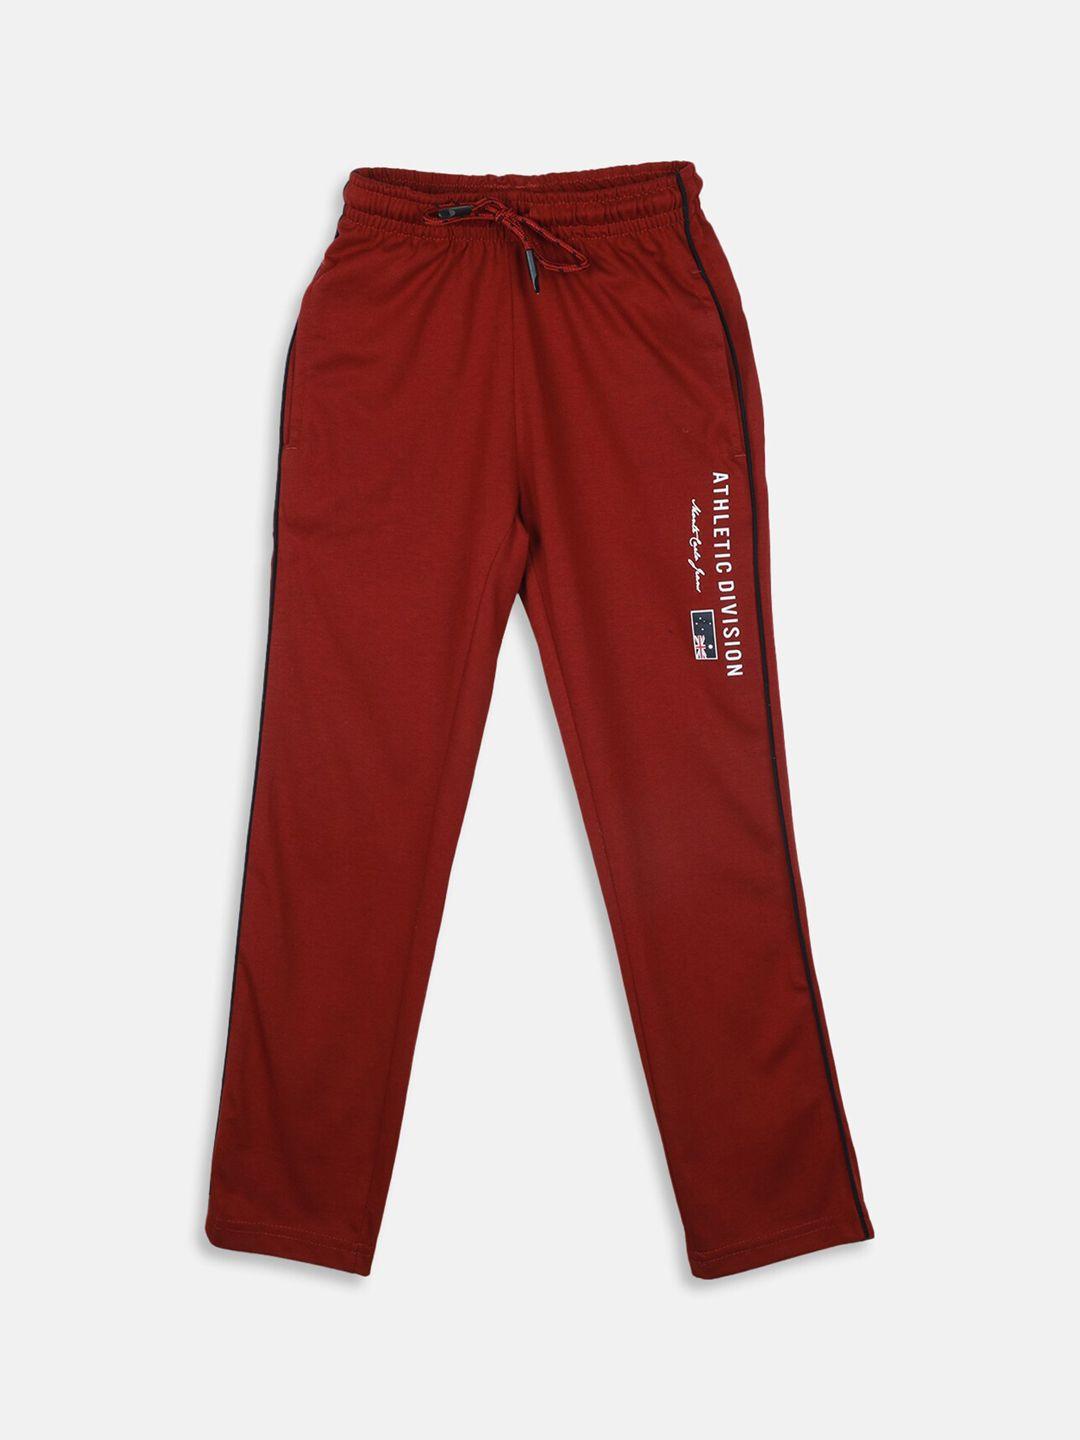 monte carlo boys regular fit mid-rise track pants